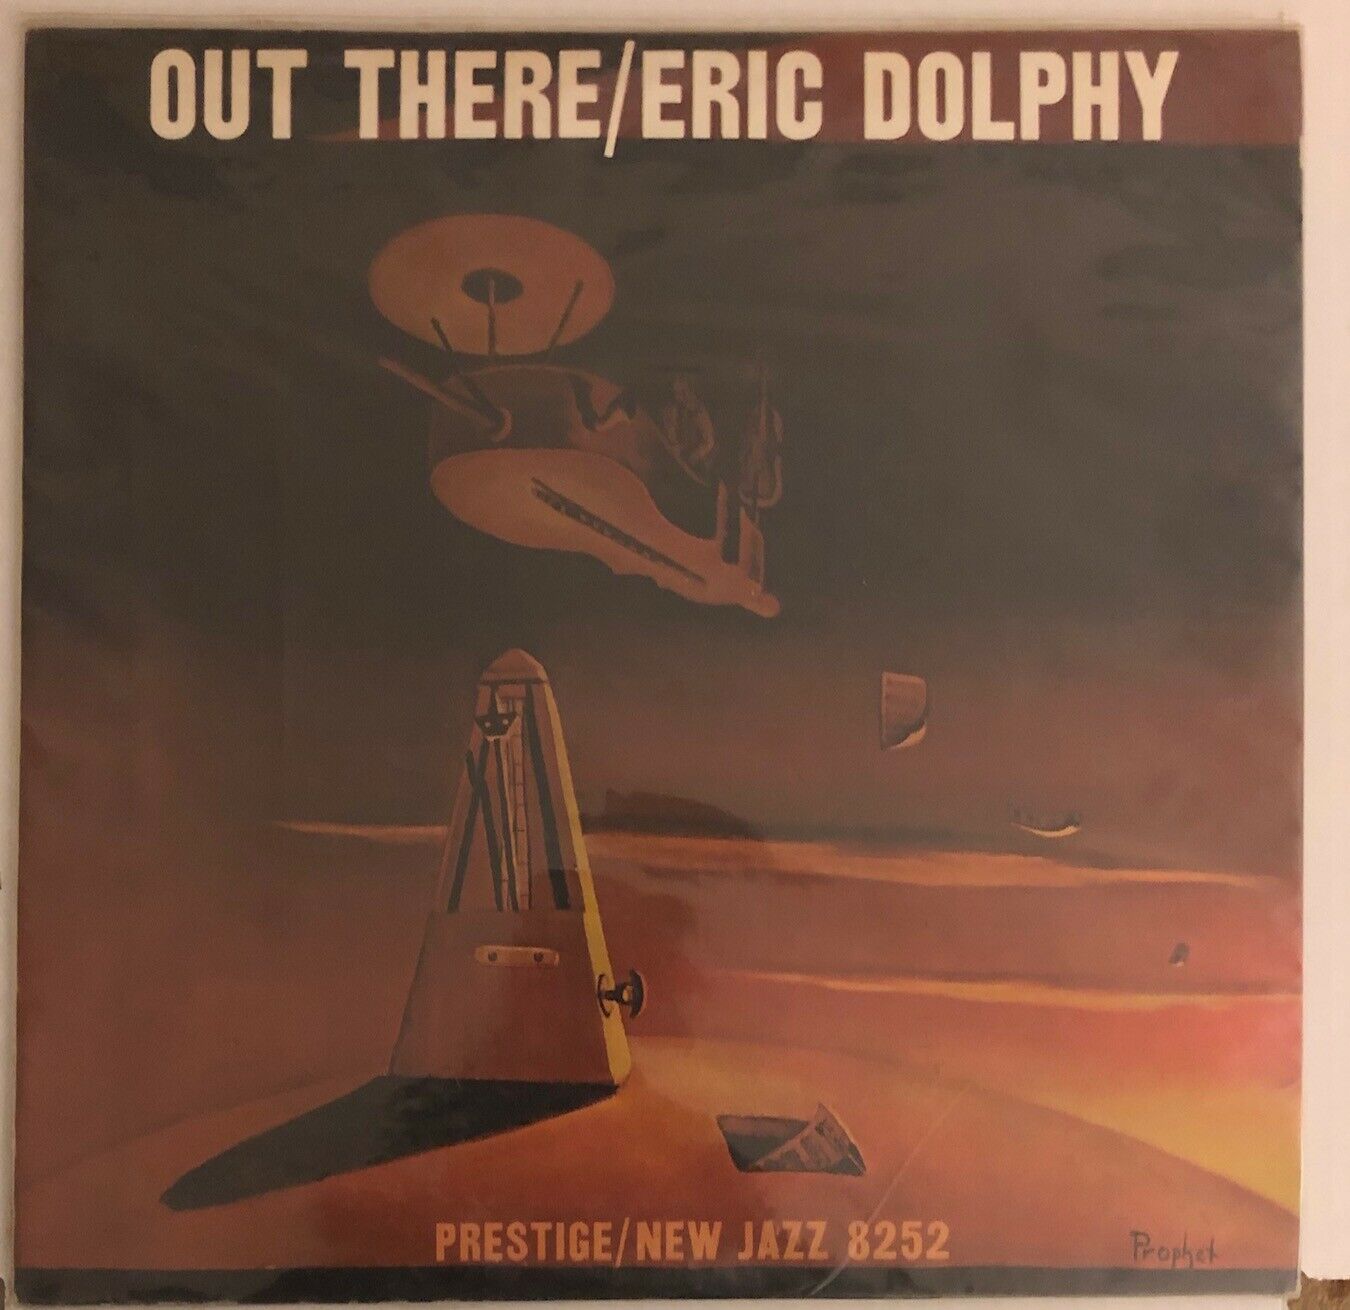 popsike.com - ERIC DOLPHY Out There Prestige OJC 023 Jazz LP EX